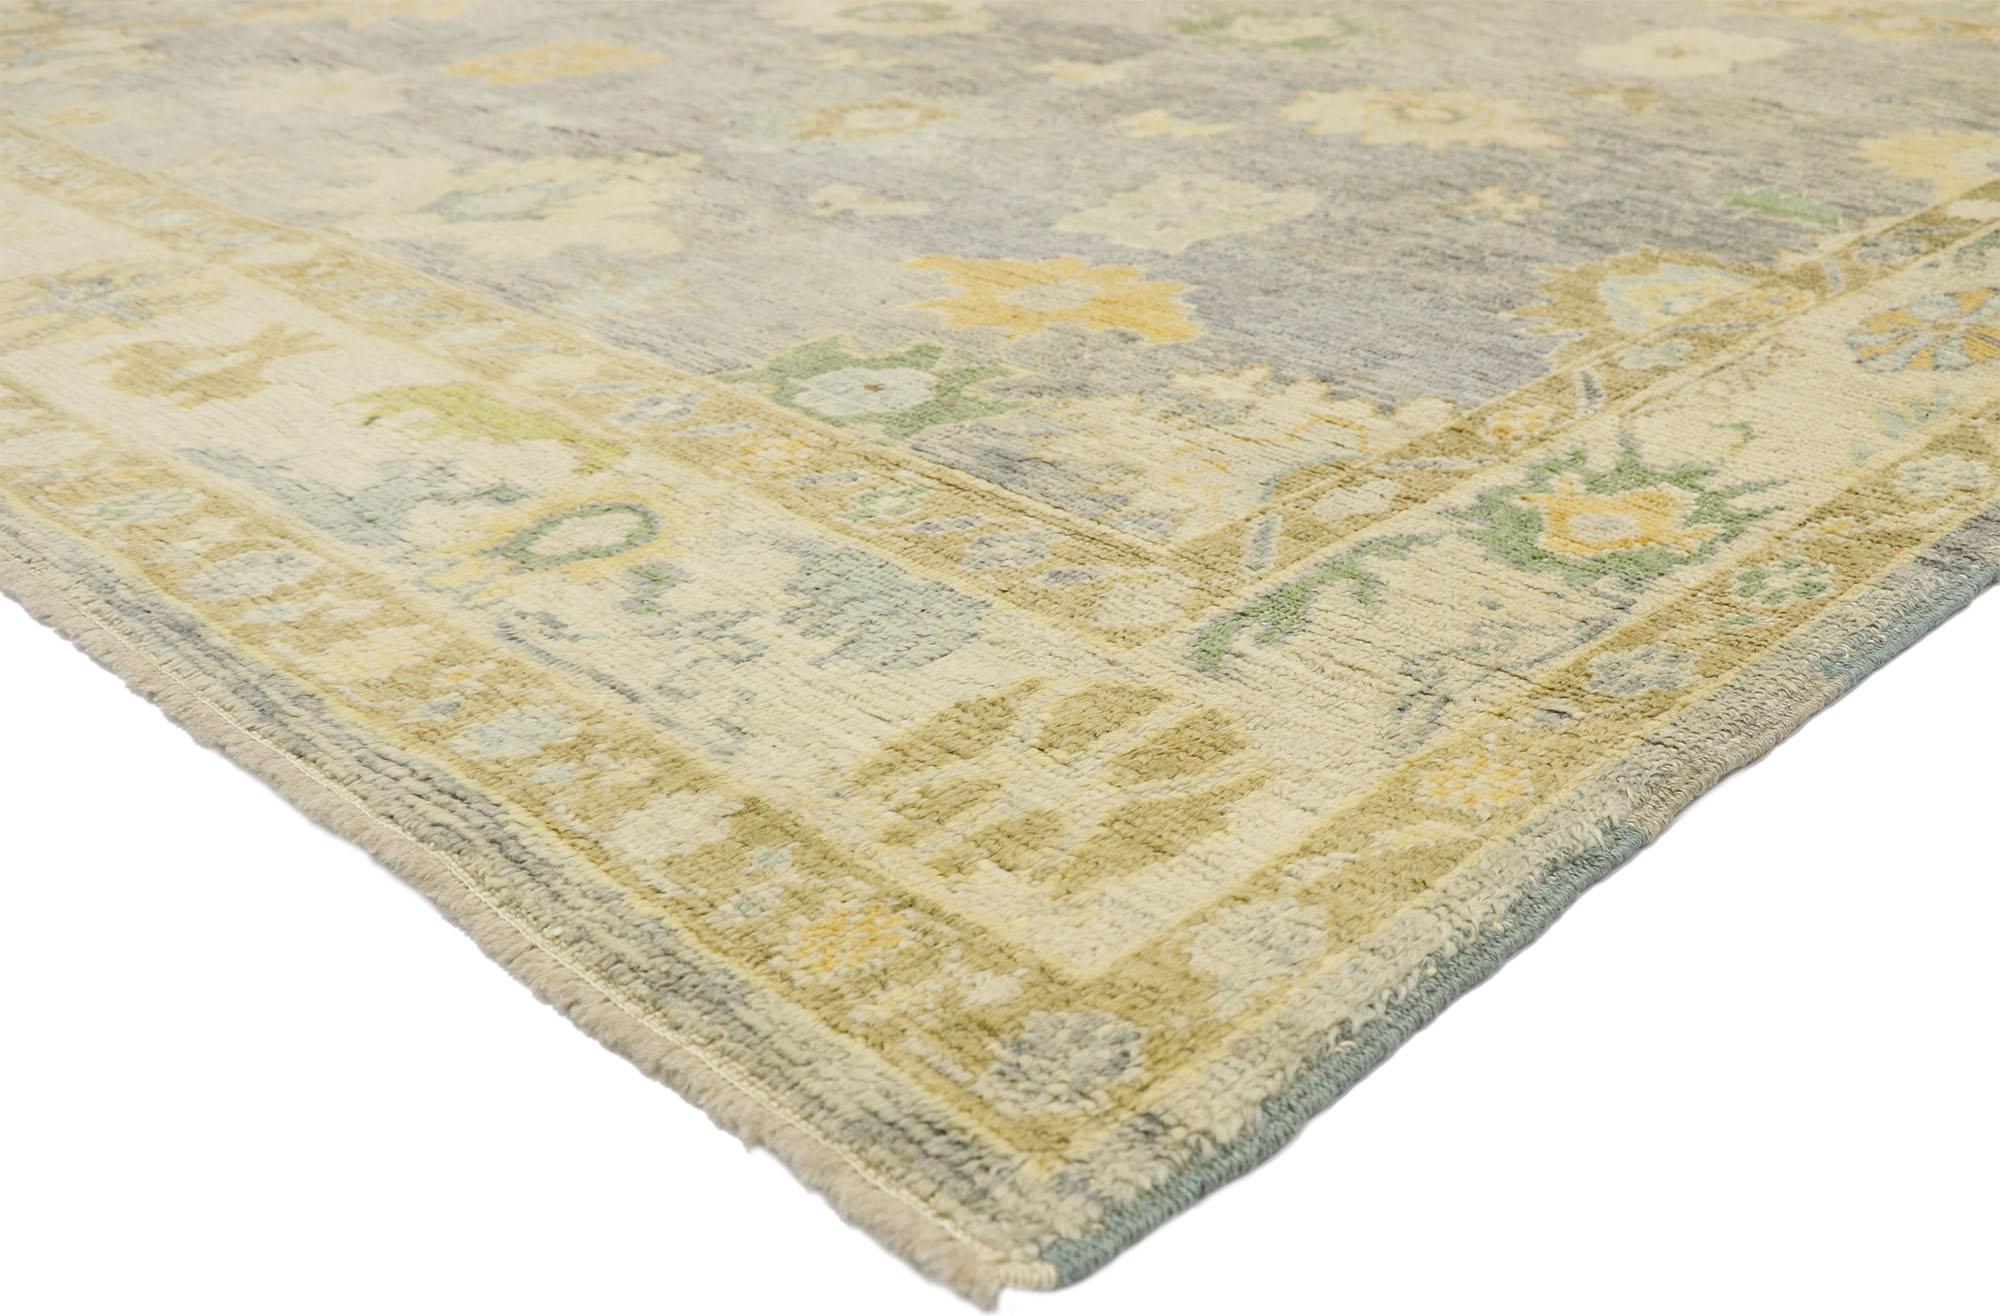 52544, contemporary Turkish Oushak rug with pastel colors and French Transitional style. Highly stylish yet tastefully casual, this new colorful Turkish Oushak rug features an all-over geometric pattern composed of Harshang motifs, blooming